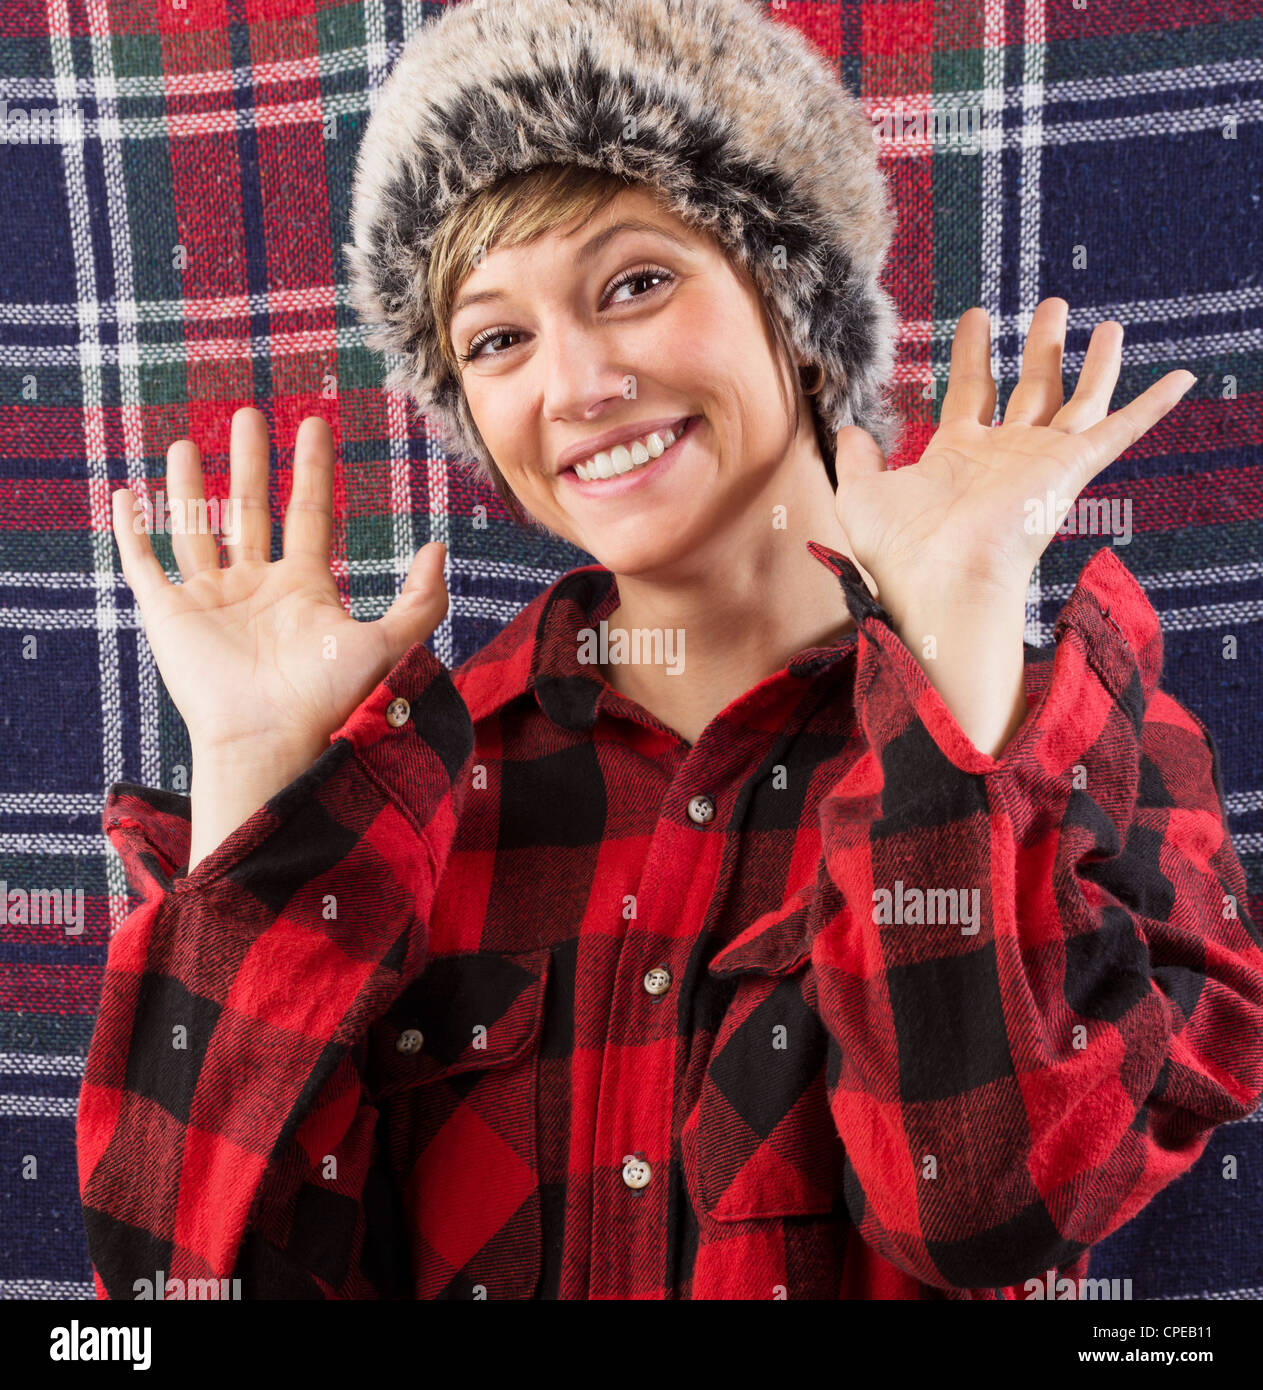 Hipster Lumberjack Print Plaid Or Flannel Pattern Green And Beige High-Res  Vector Graphic - Getty Images